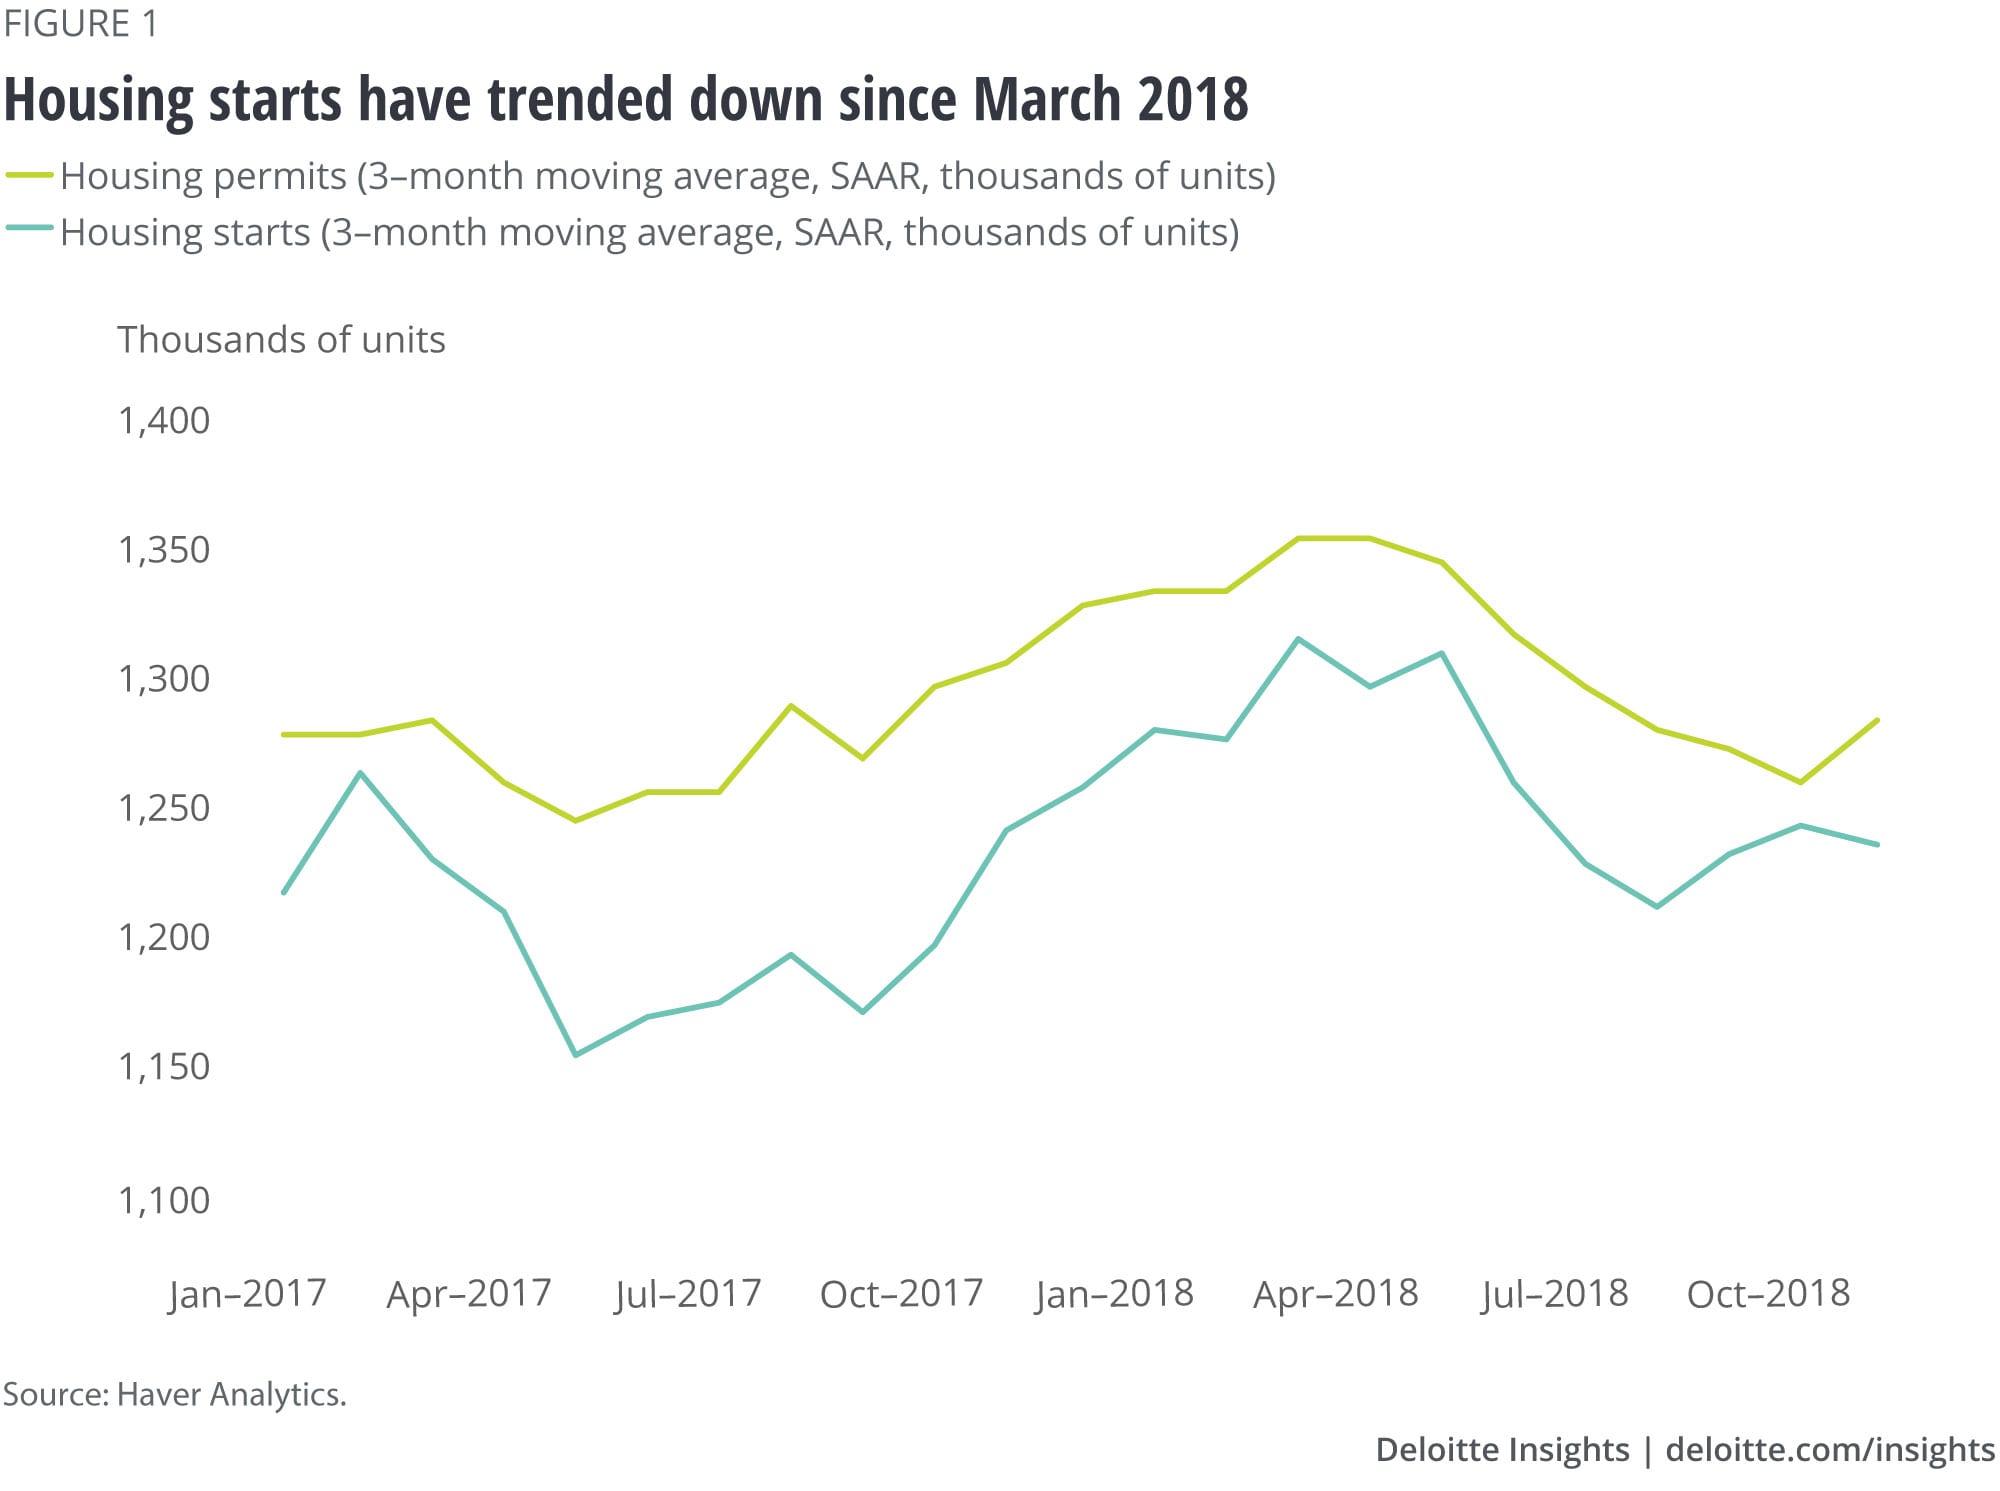 Housing starts have trended down since March 2018